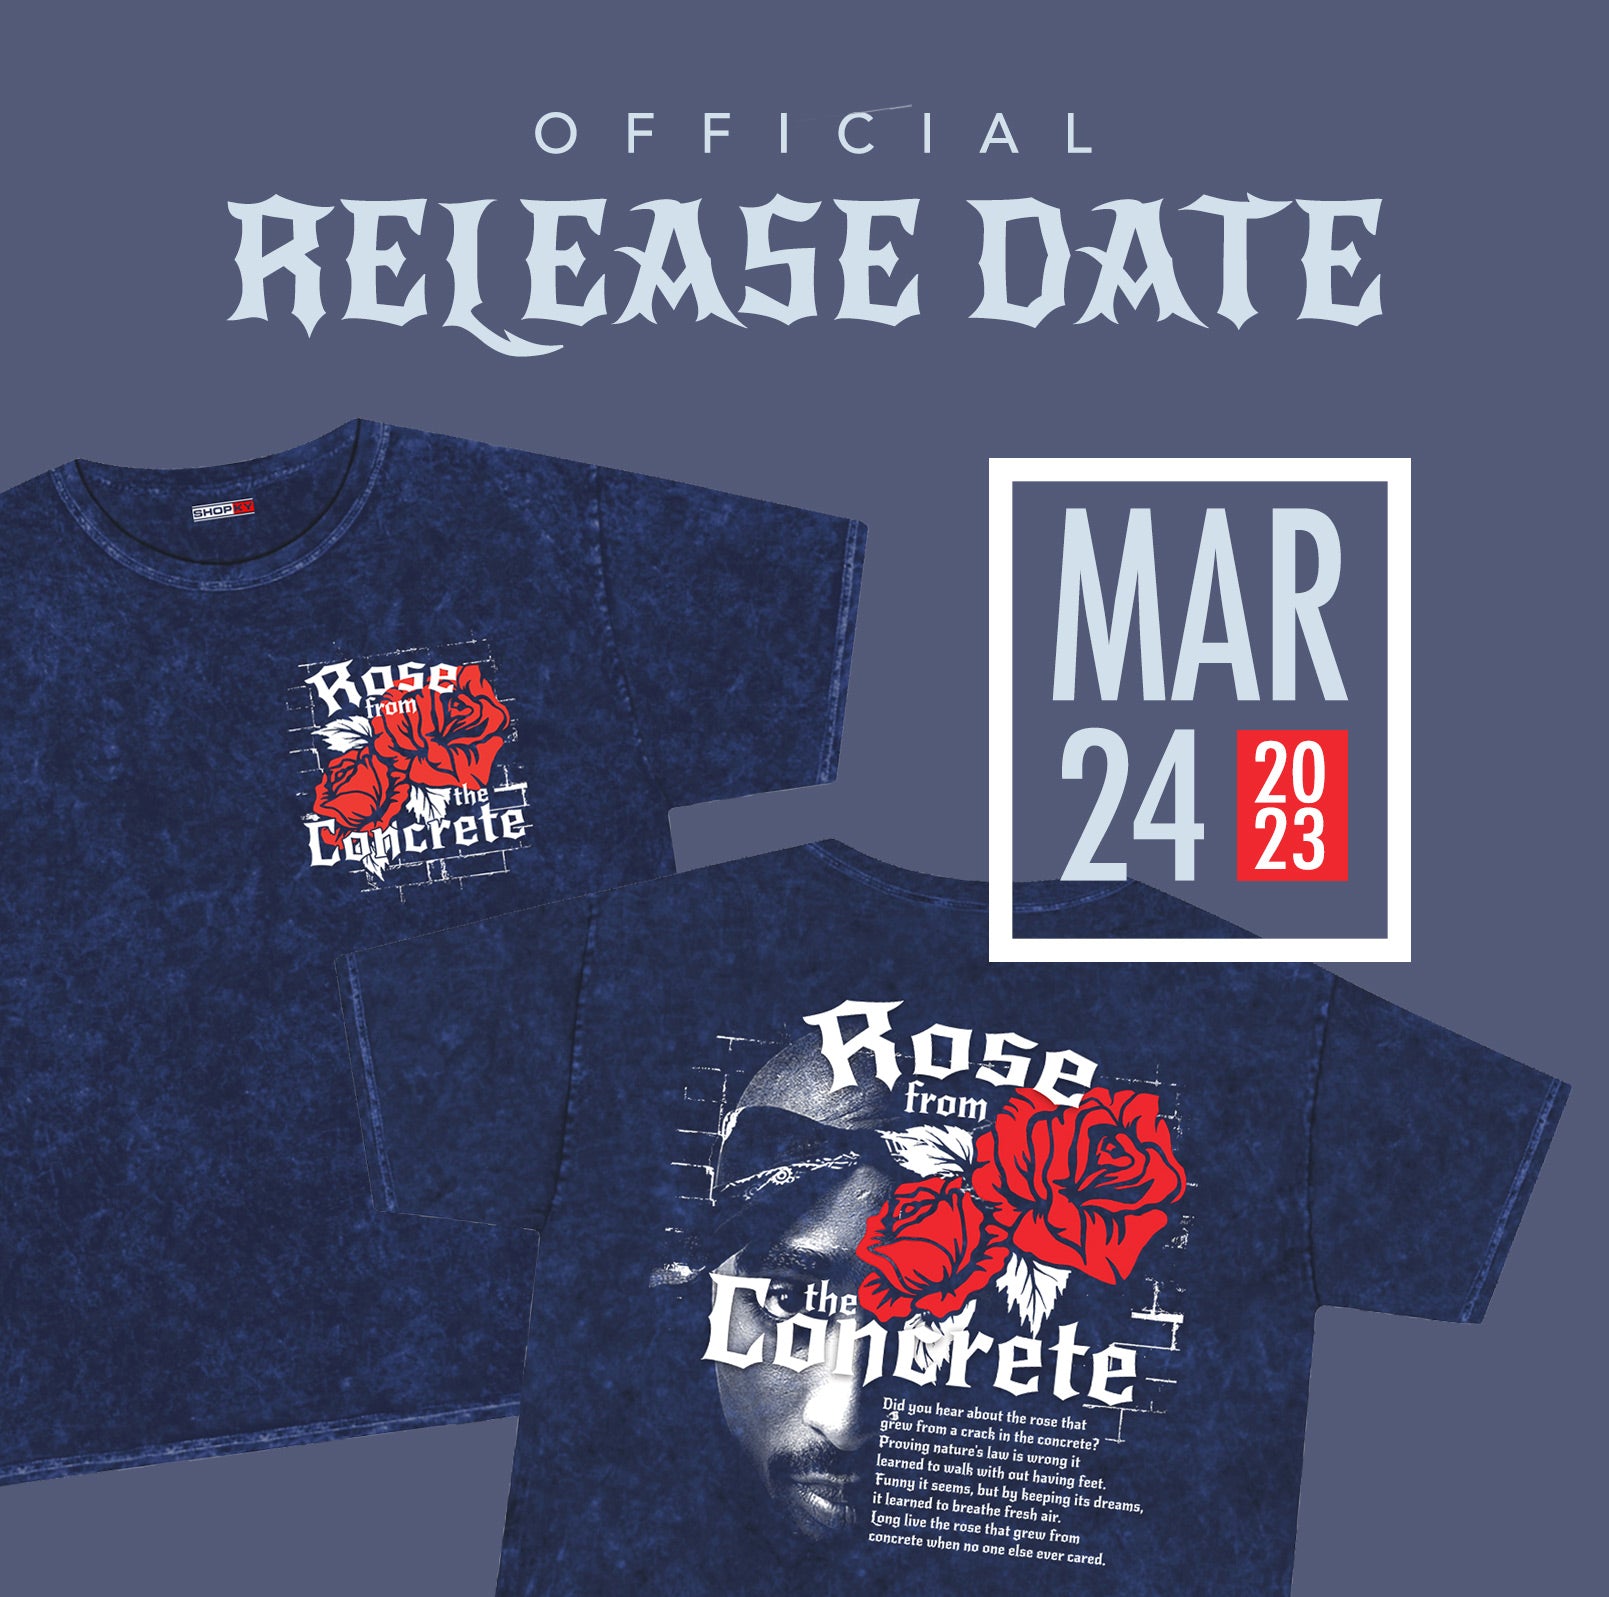 Rose from the Concrete - Mineral wash navy t-shirt